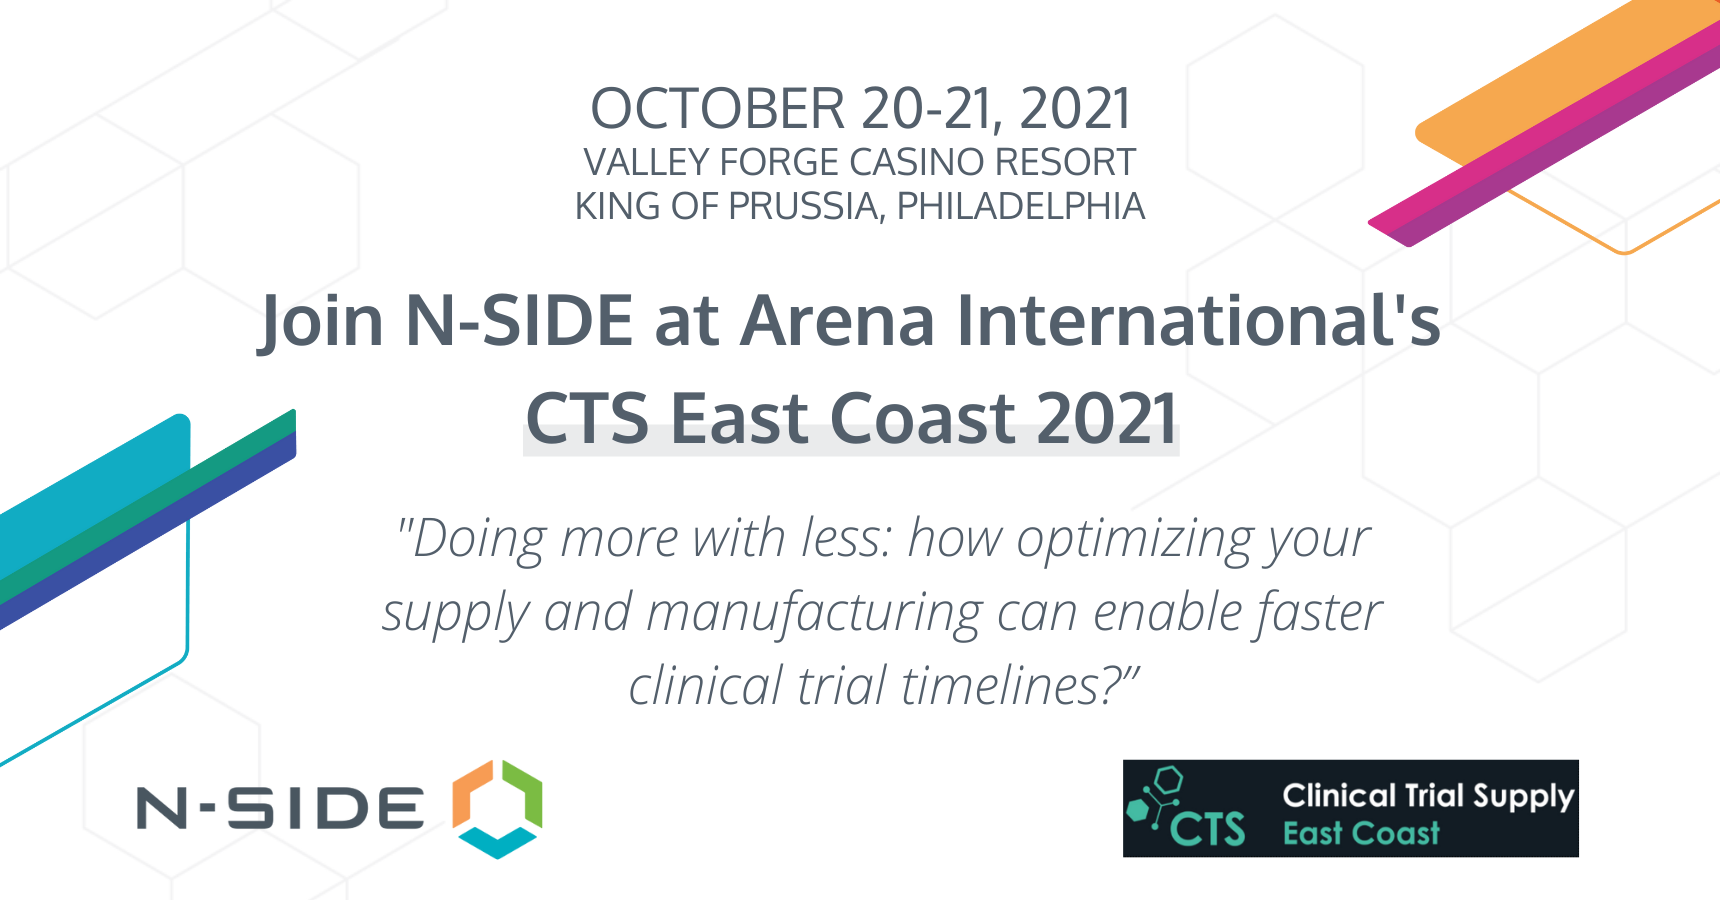 Meet the N-SIDE team at Arena's Clinical Trial Supply East Coast 2021!